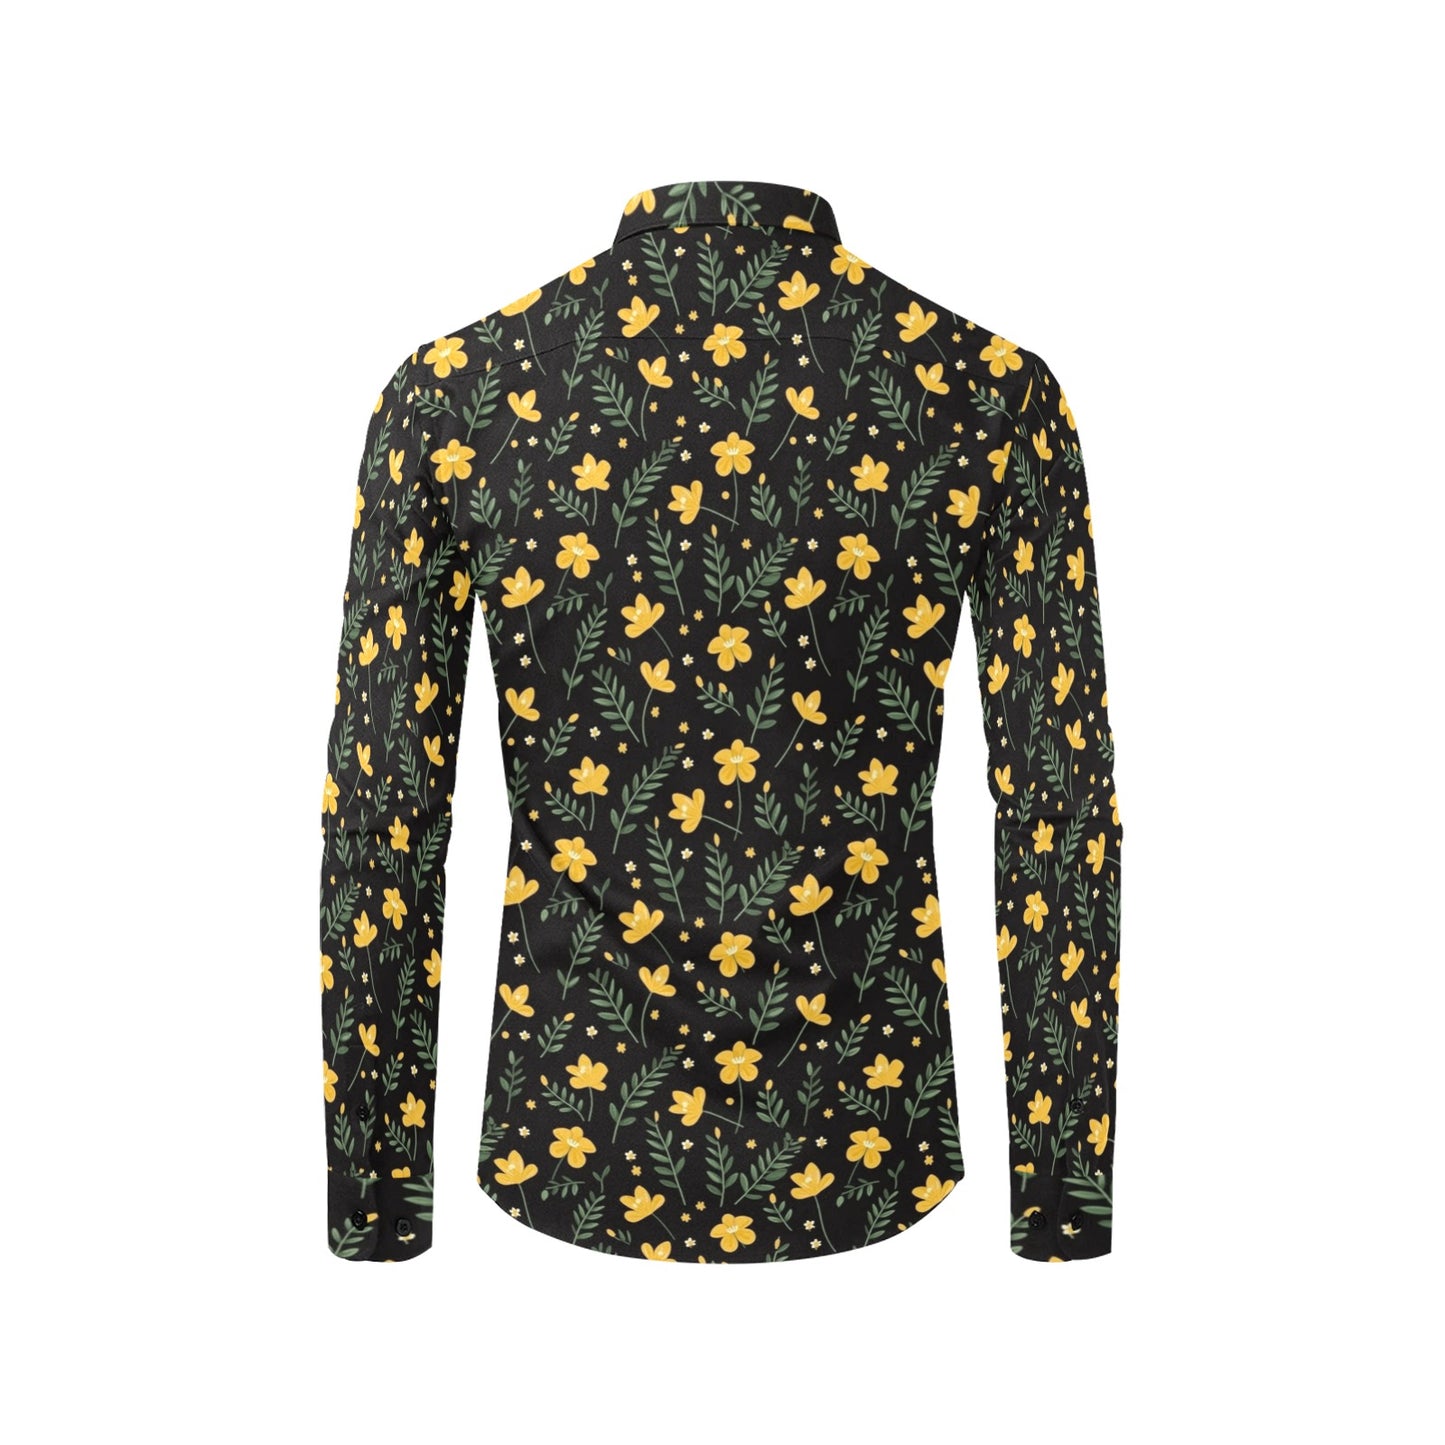 Black Yellow Floral Long Sleeve Men Button Up Shirt, Leaves Flowers Print Casual Buttoned Collared Designer Dress Shirt with Chest Pocket Starcove Fashion